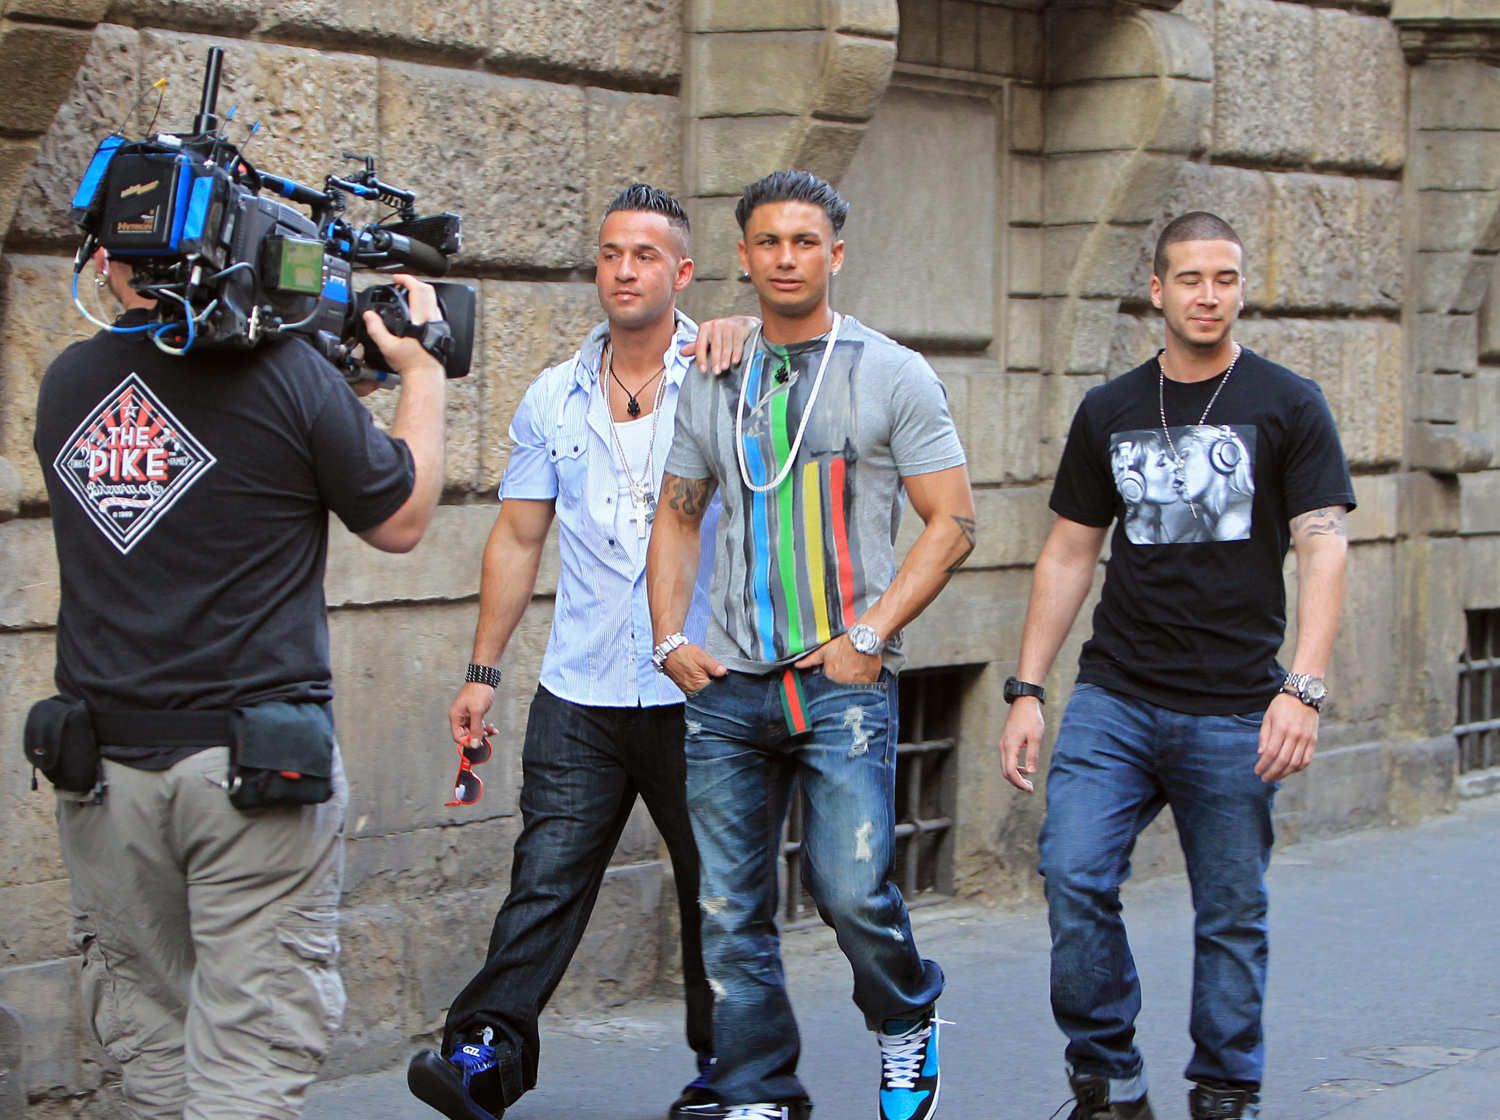 Jersey Shore' to start filming on sixth season - with pregnant